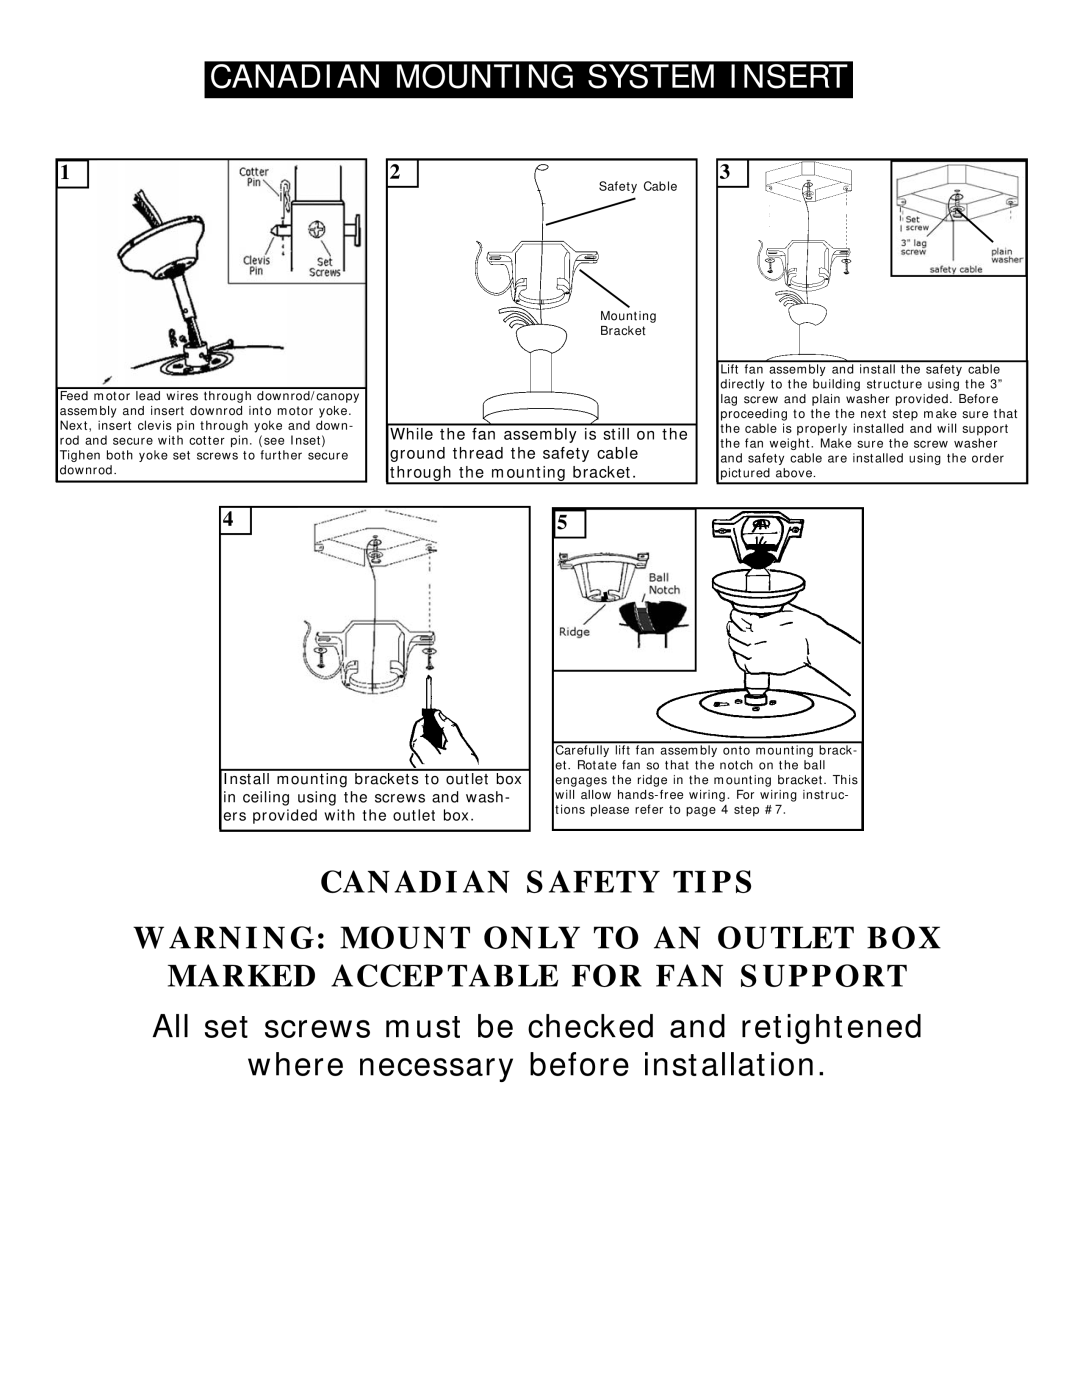 Monte Carlo Fan Company 5SO52 Canadian Safety Tips, While the fan assembly is still on the, ground thread the safety cable 